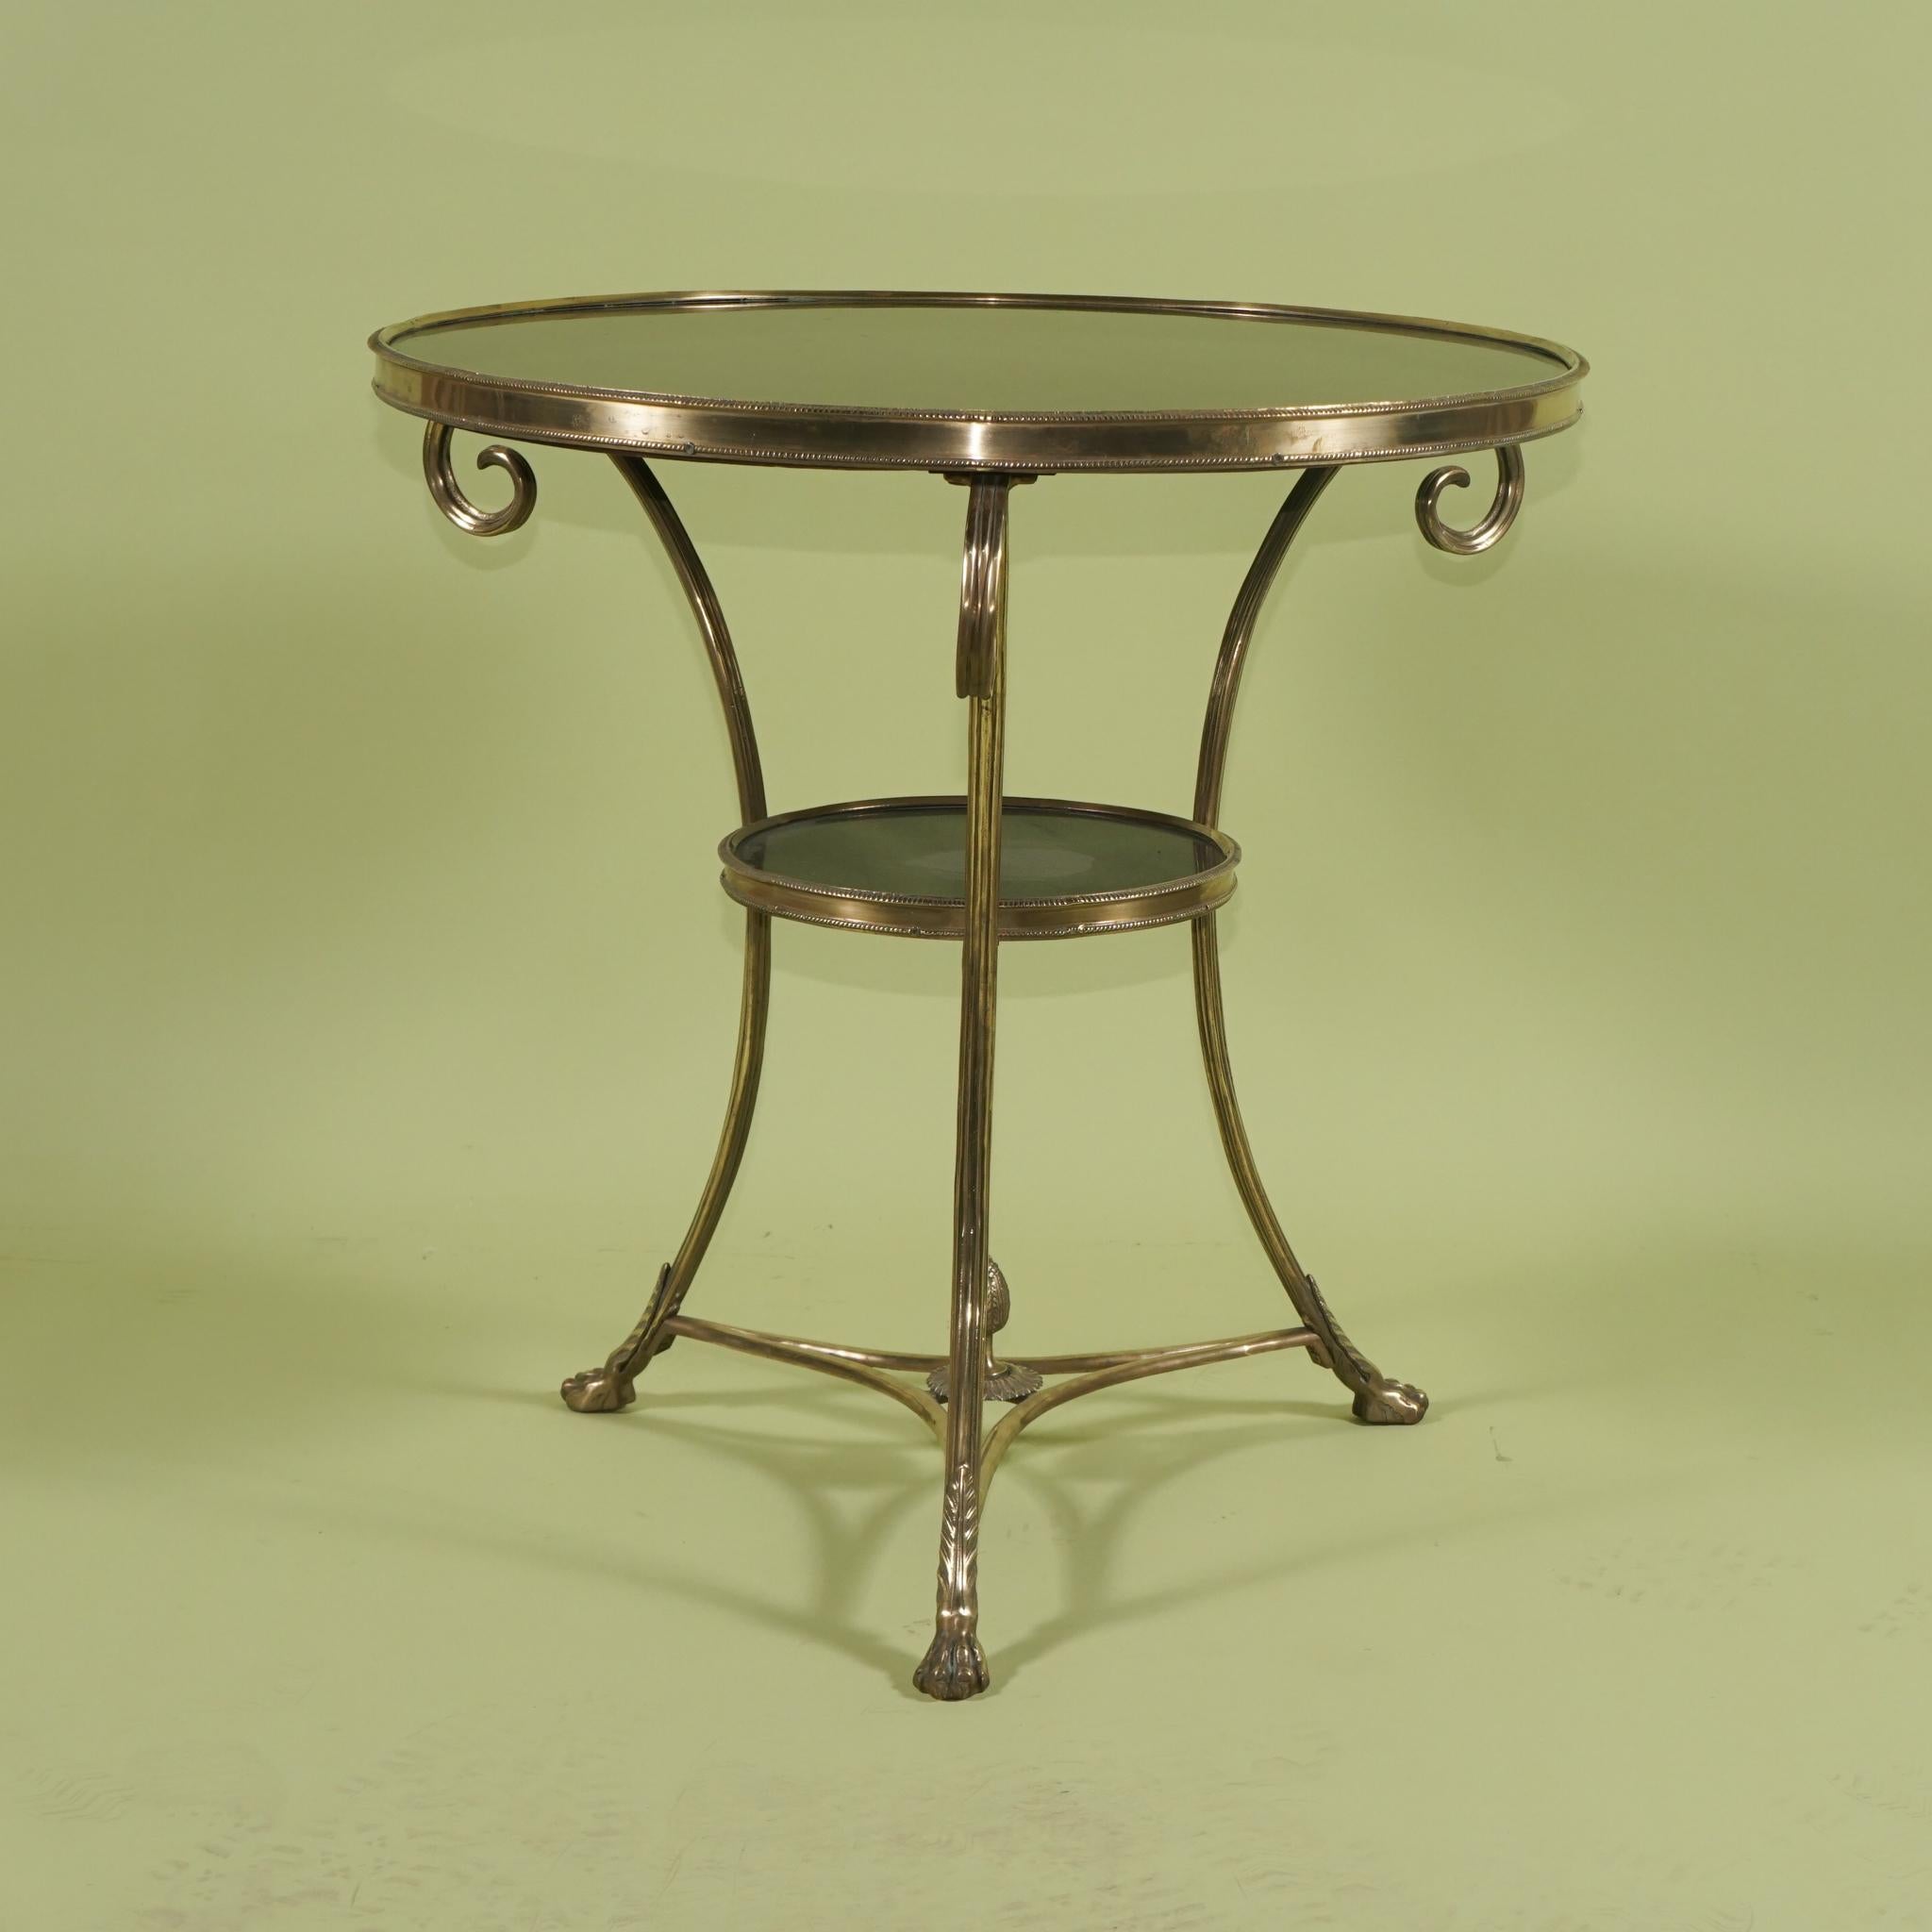 This table crafted by an expert metalsmith is made of bronze and then highly polished. Styled in the look of a late 18th or early 19th-century gueridon or occasional table the piece has a black marble top set within the bronze beaded border as well